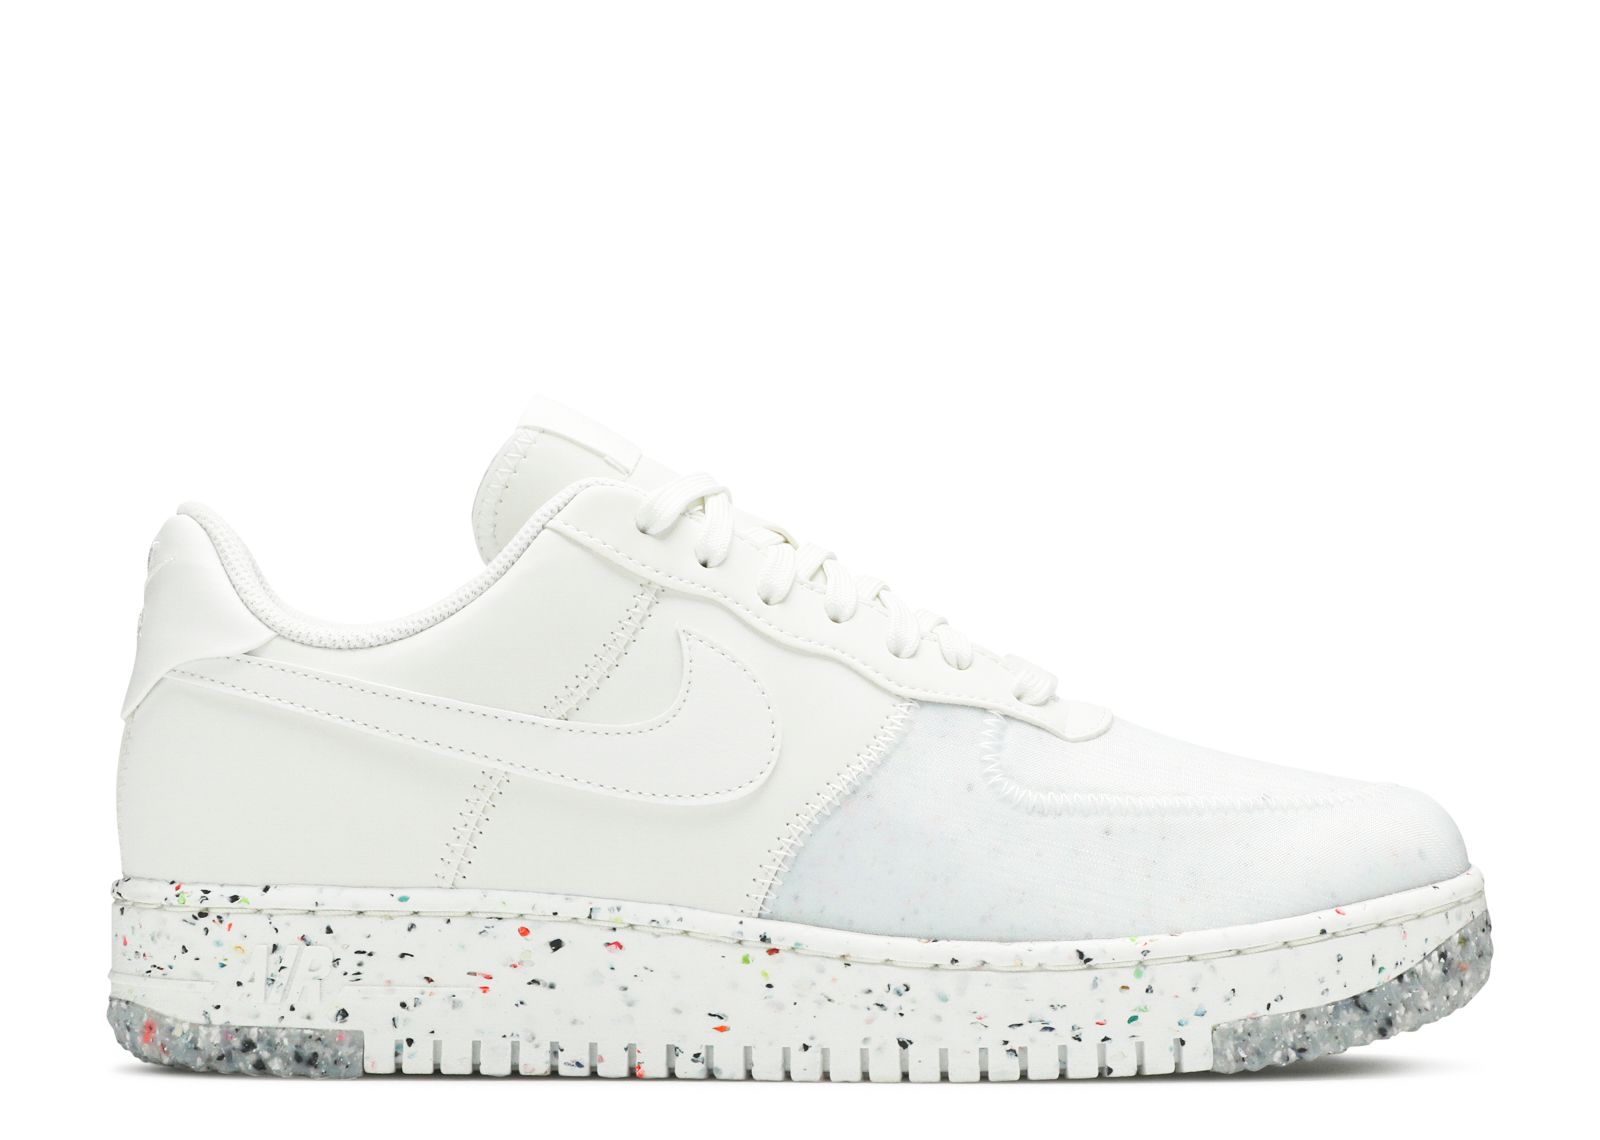 Air Force 1 Crater 'Summit White' - Nike - CZ1524 - pure platinum/summit white/chambray blue/barely volt | Flight Club